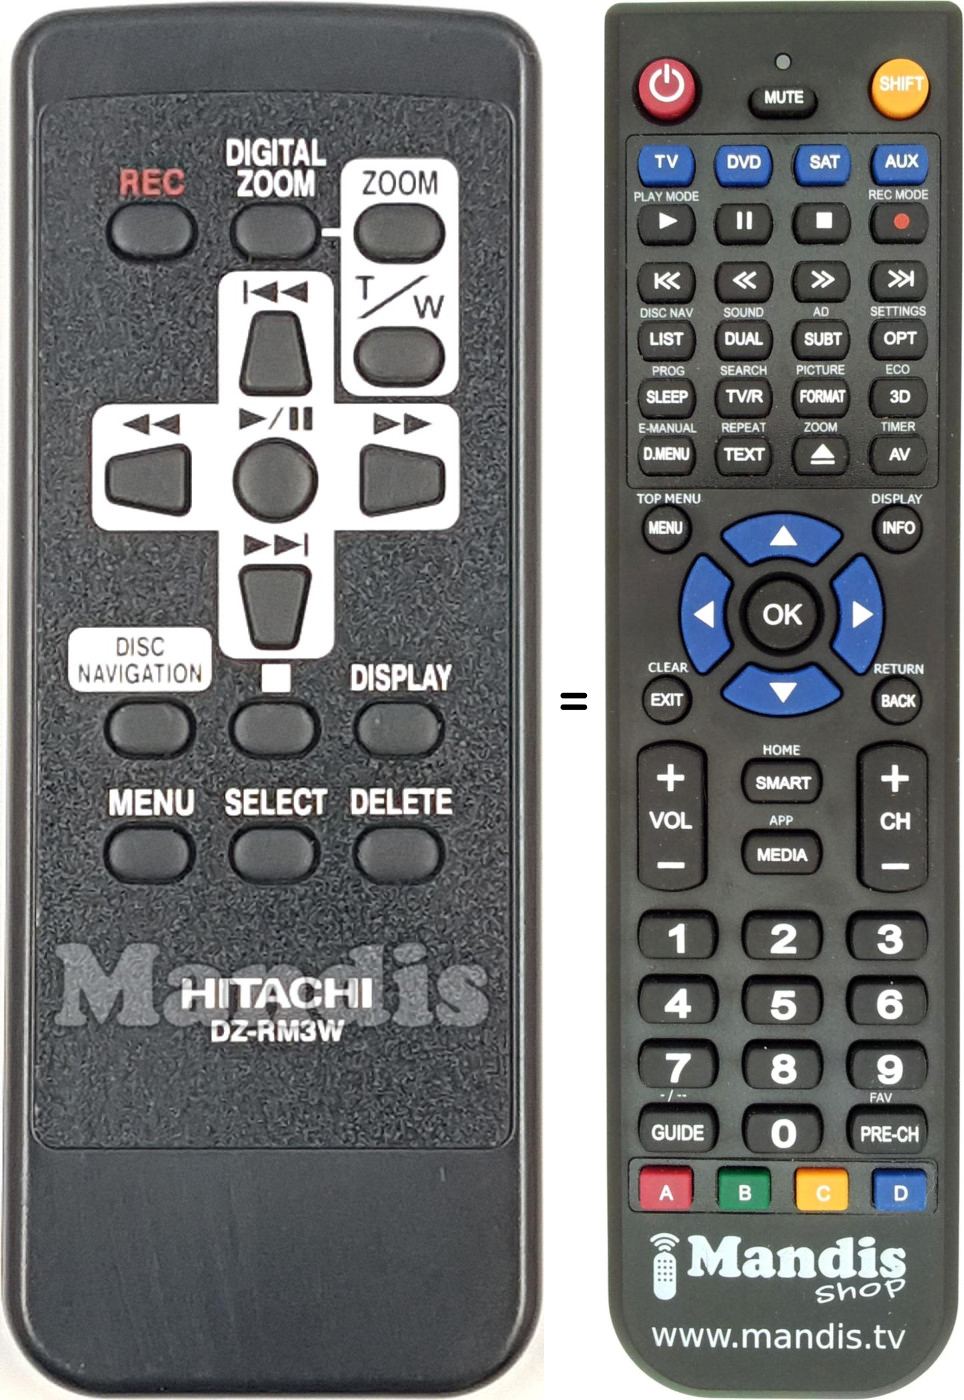 Replacement remote control DZ-RM3WF